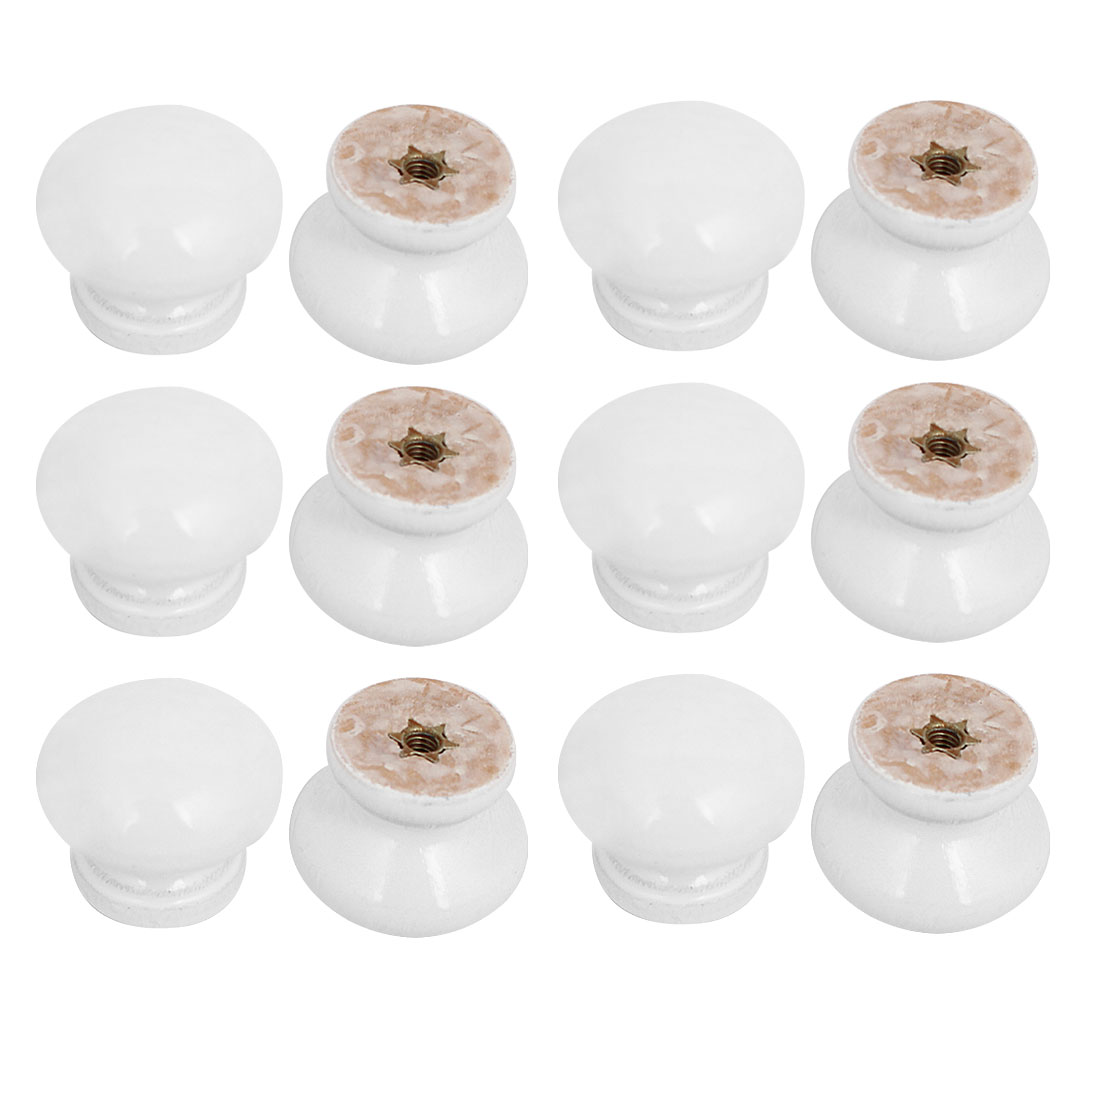 Unique Bargains 12-Pack Cabinet Drawer Wood Knobs Handles White Finish 1.1" Dia - image 1 of 4